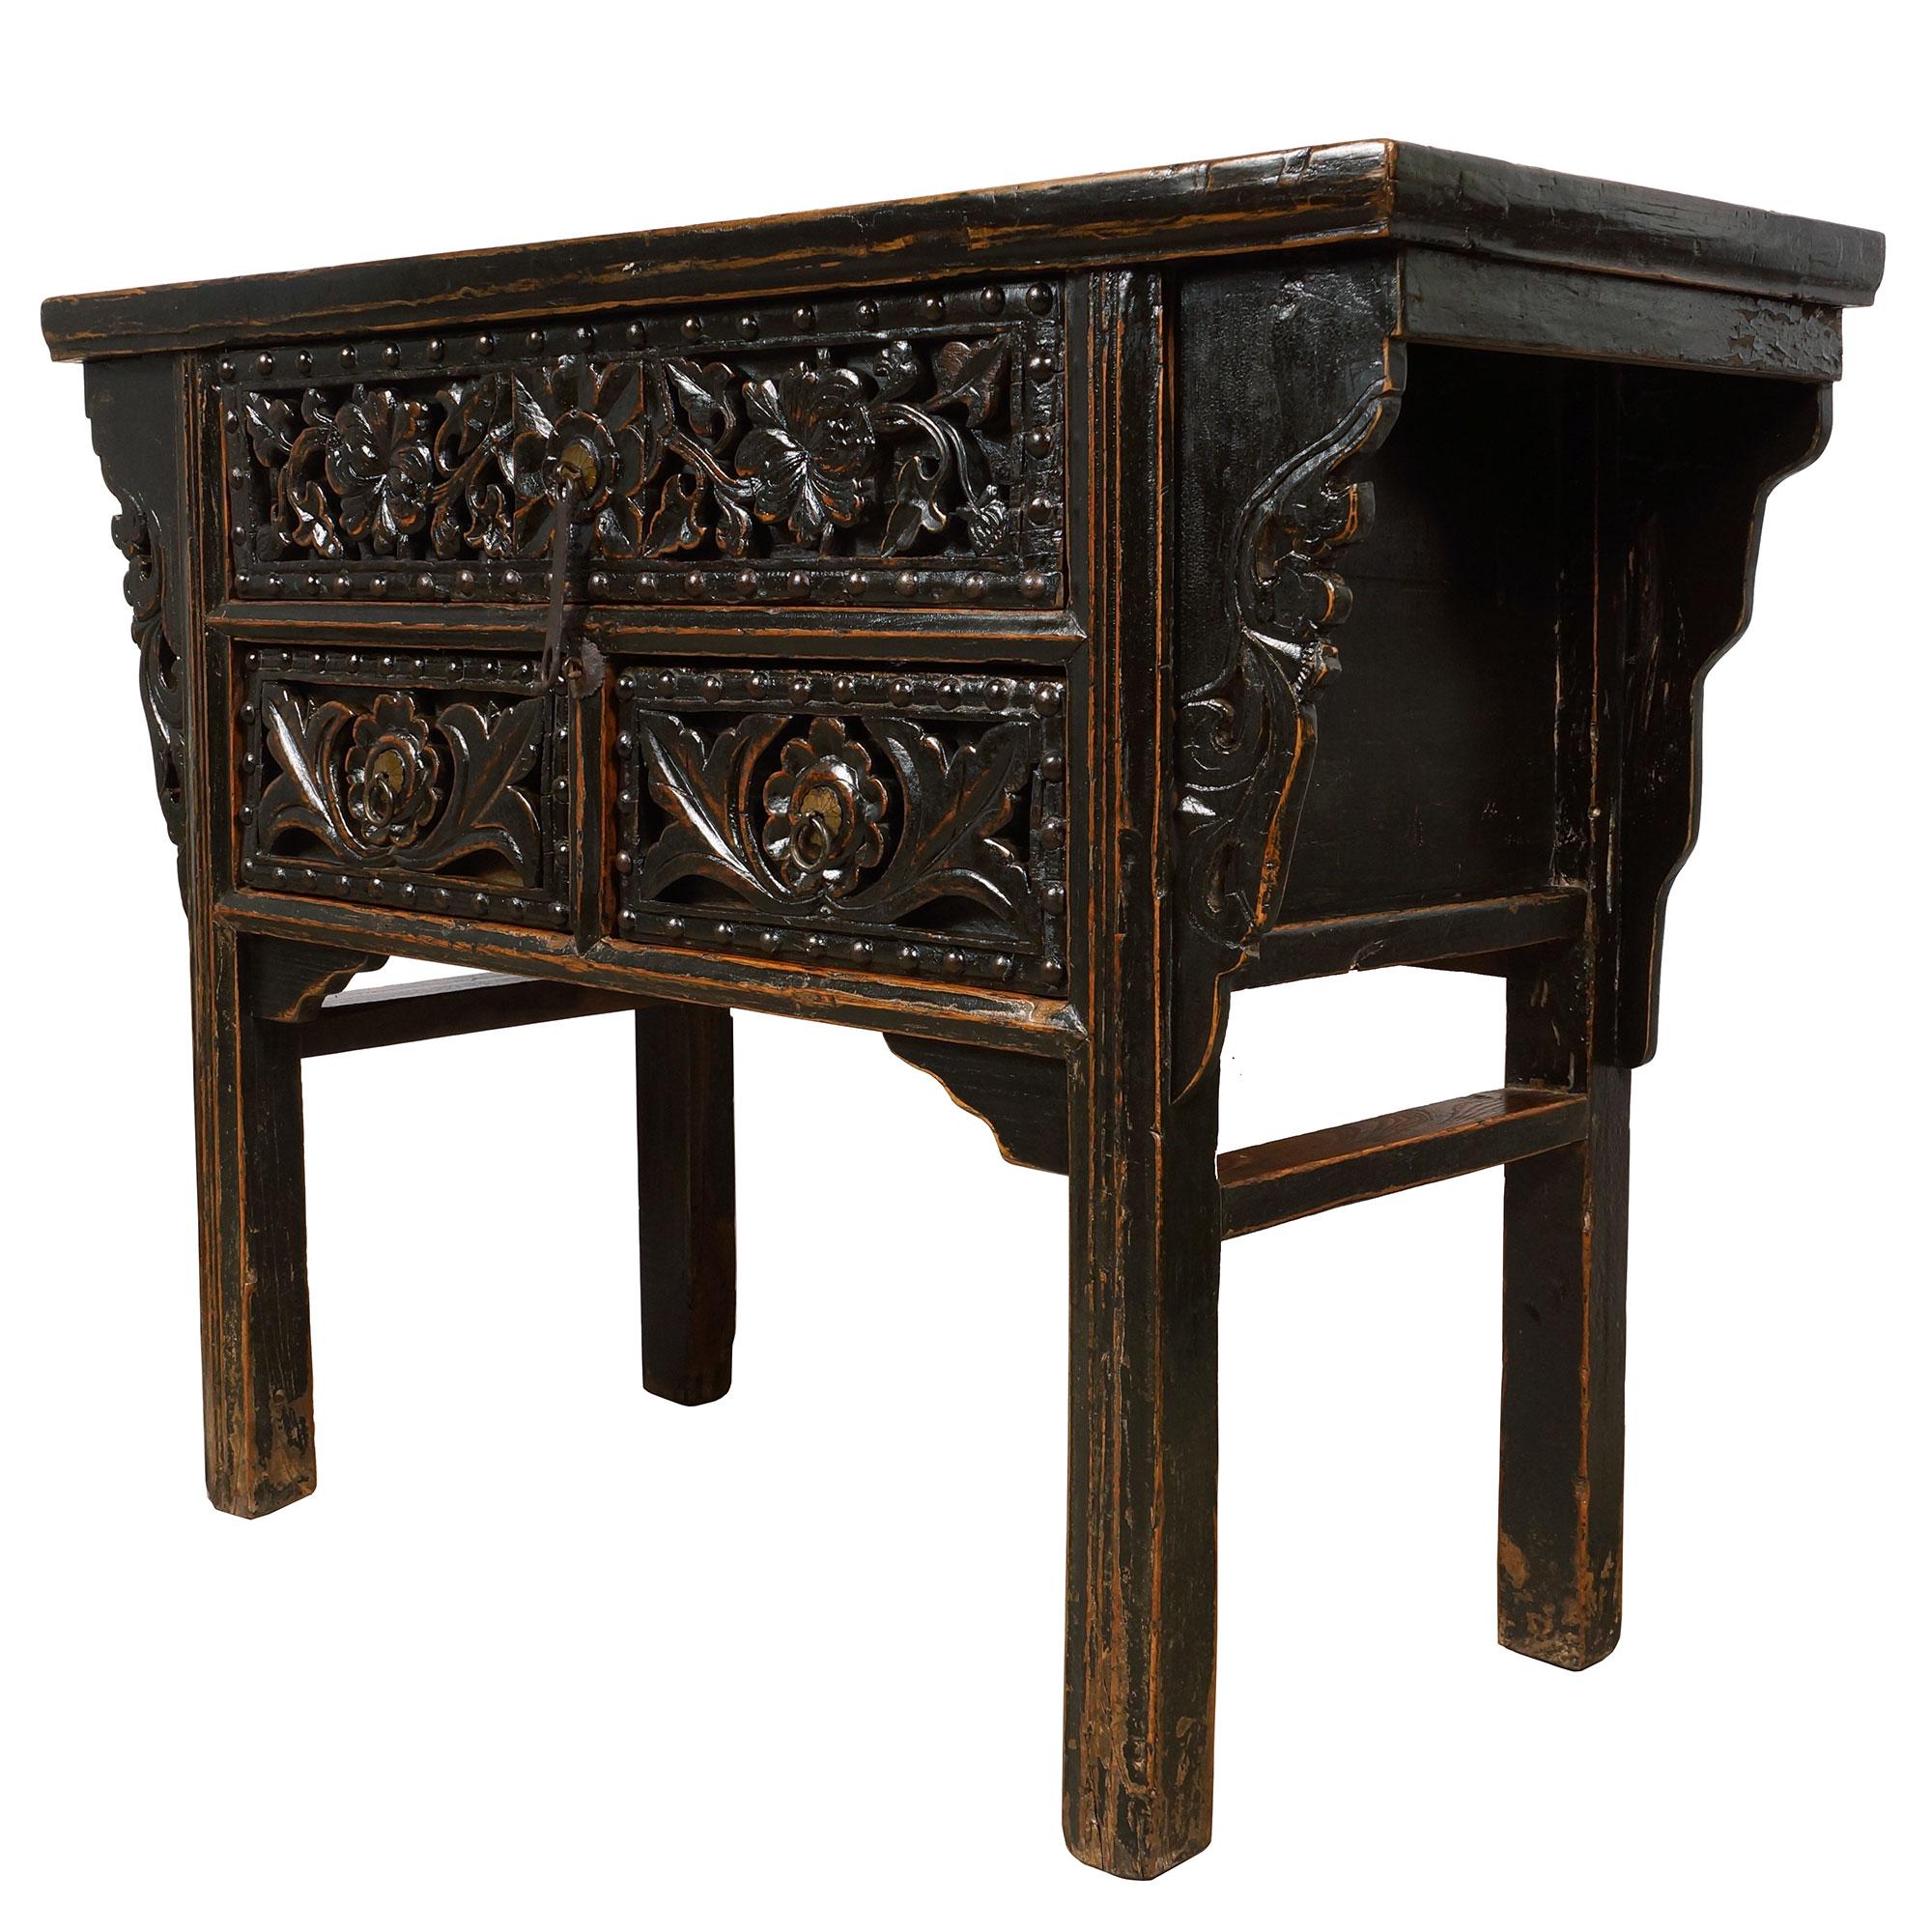 Size: 33 1/2in H x 44 1/2in W x 19 1/4in D
Drawer: Large: 5 3/4in H x 27in W x 15inD
 Small: 6in H x 12in W x 15in D
Origin: Shan Xi, China
Circa: 1850 - 1900
Material: Elm wood
Condition: Solid wood construction, beautiful deep raising carved